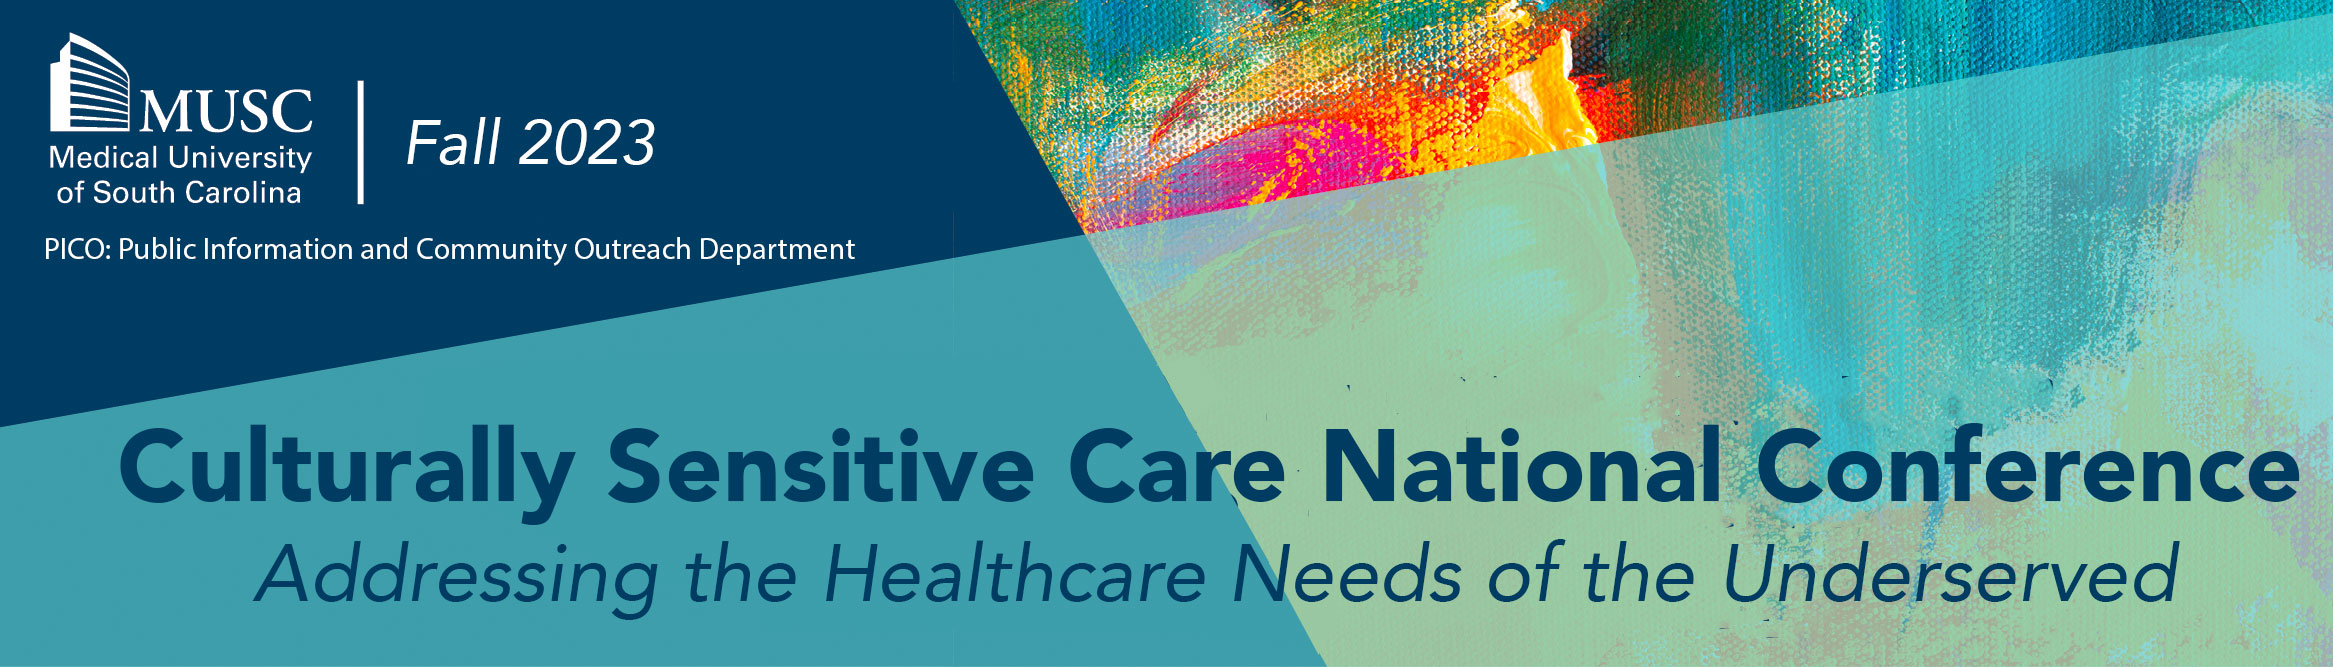 Culturally Sensitive Care National Conference